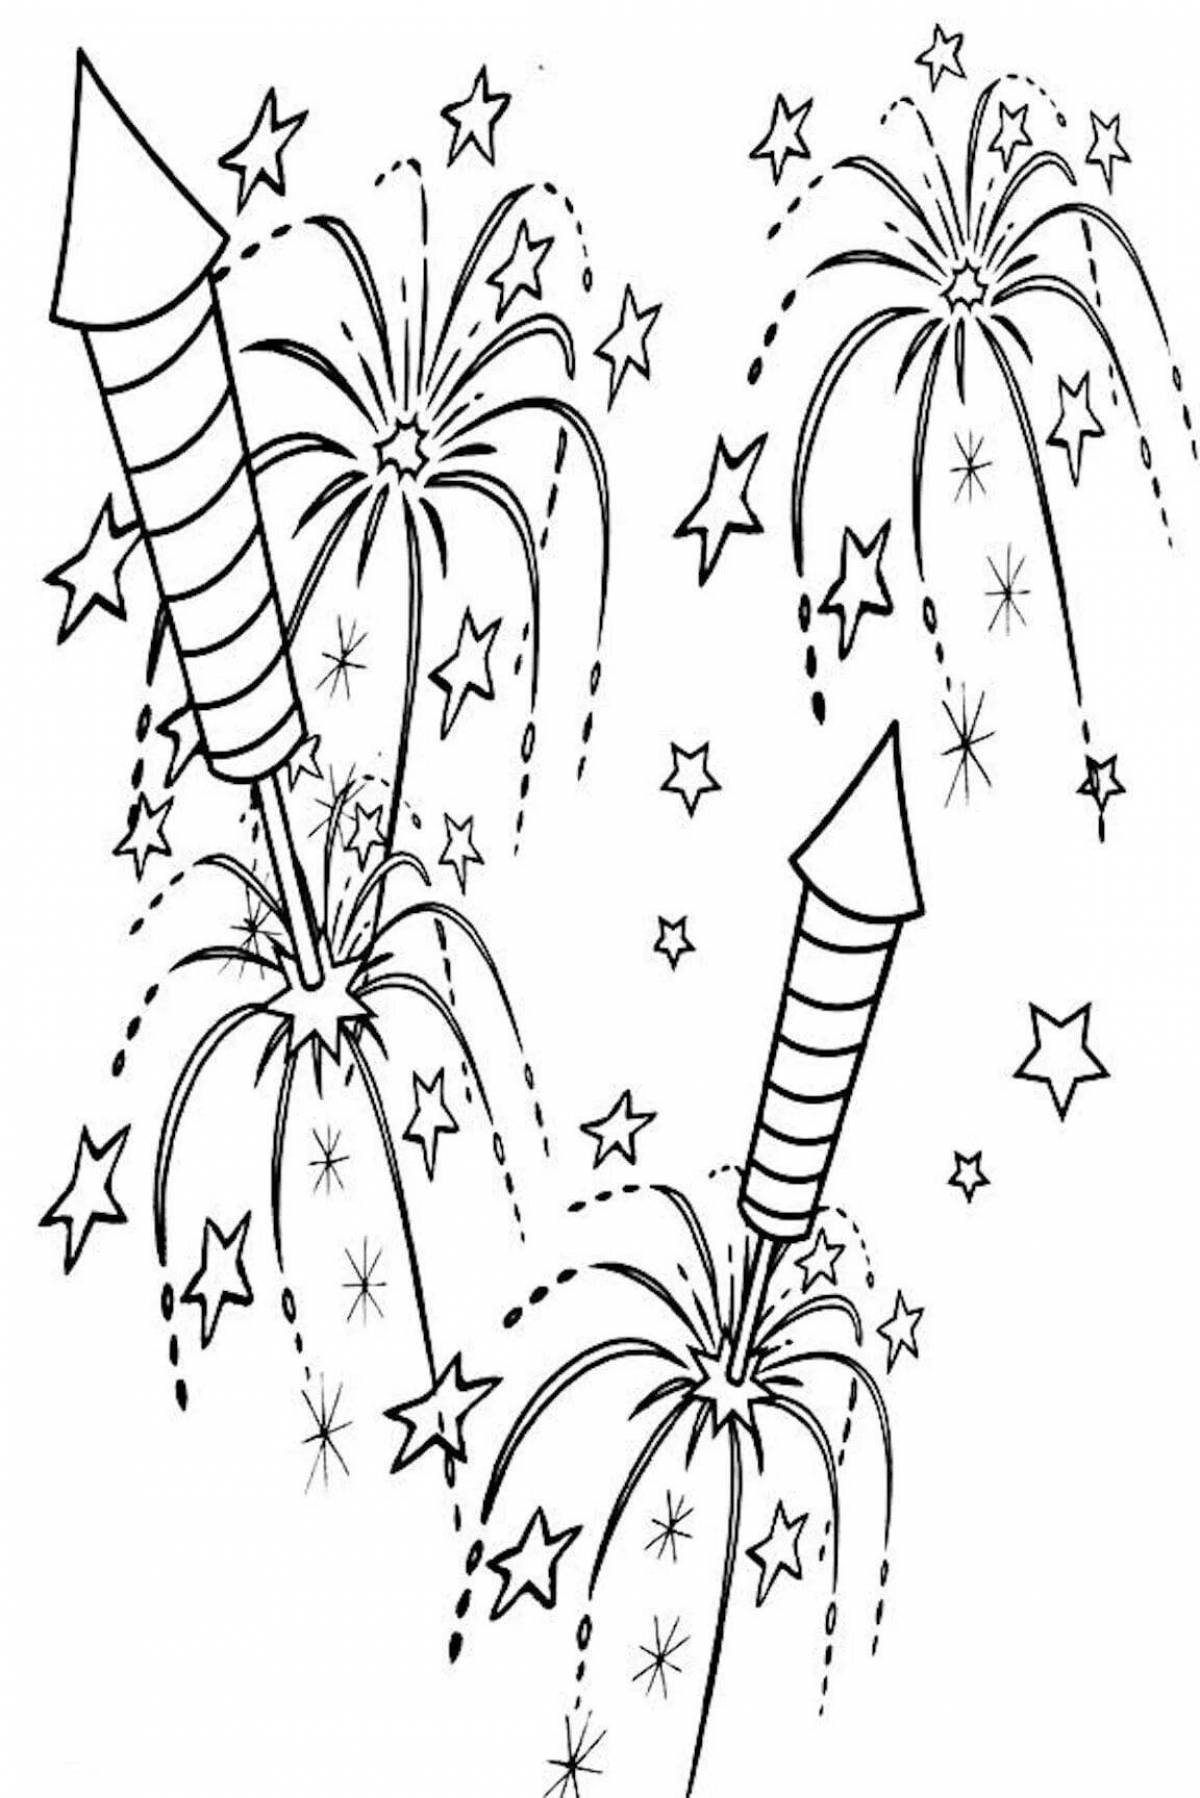 Shining fireworks coloring book for kids